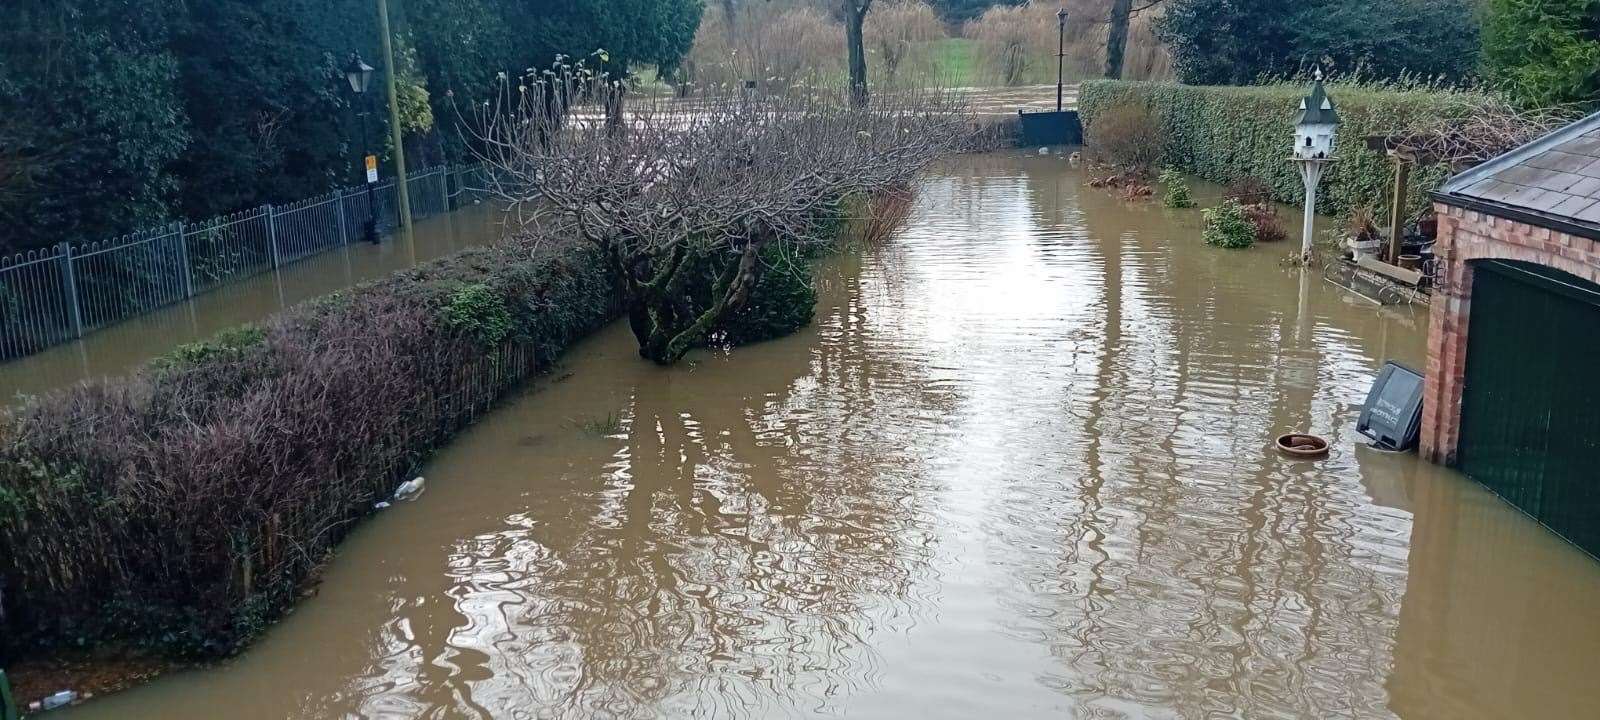 Siobhan Connor’s home in Shrewsbury has been flooded again (Siobhan Connor/PA)